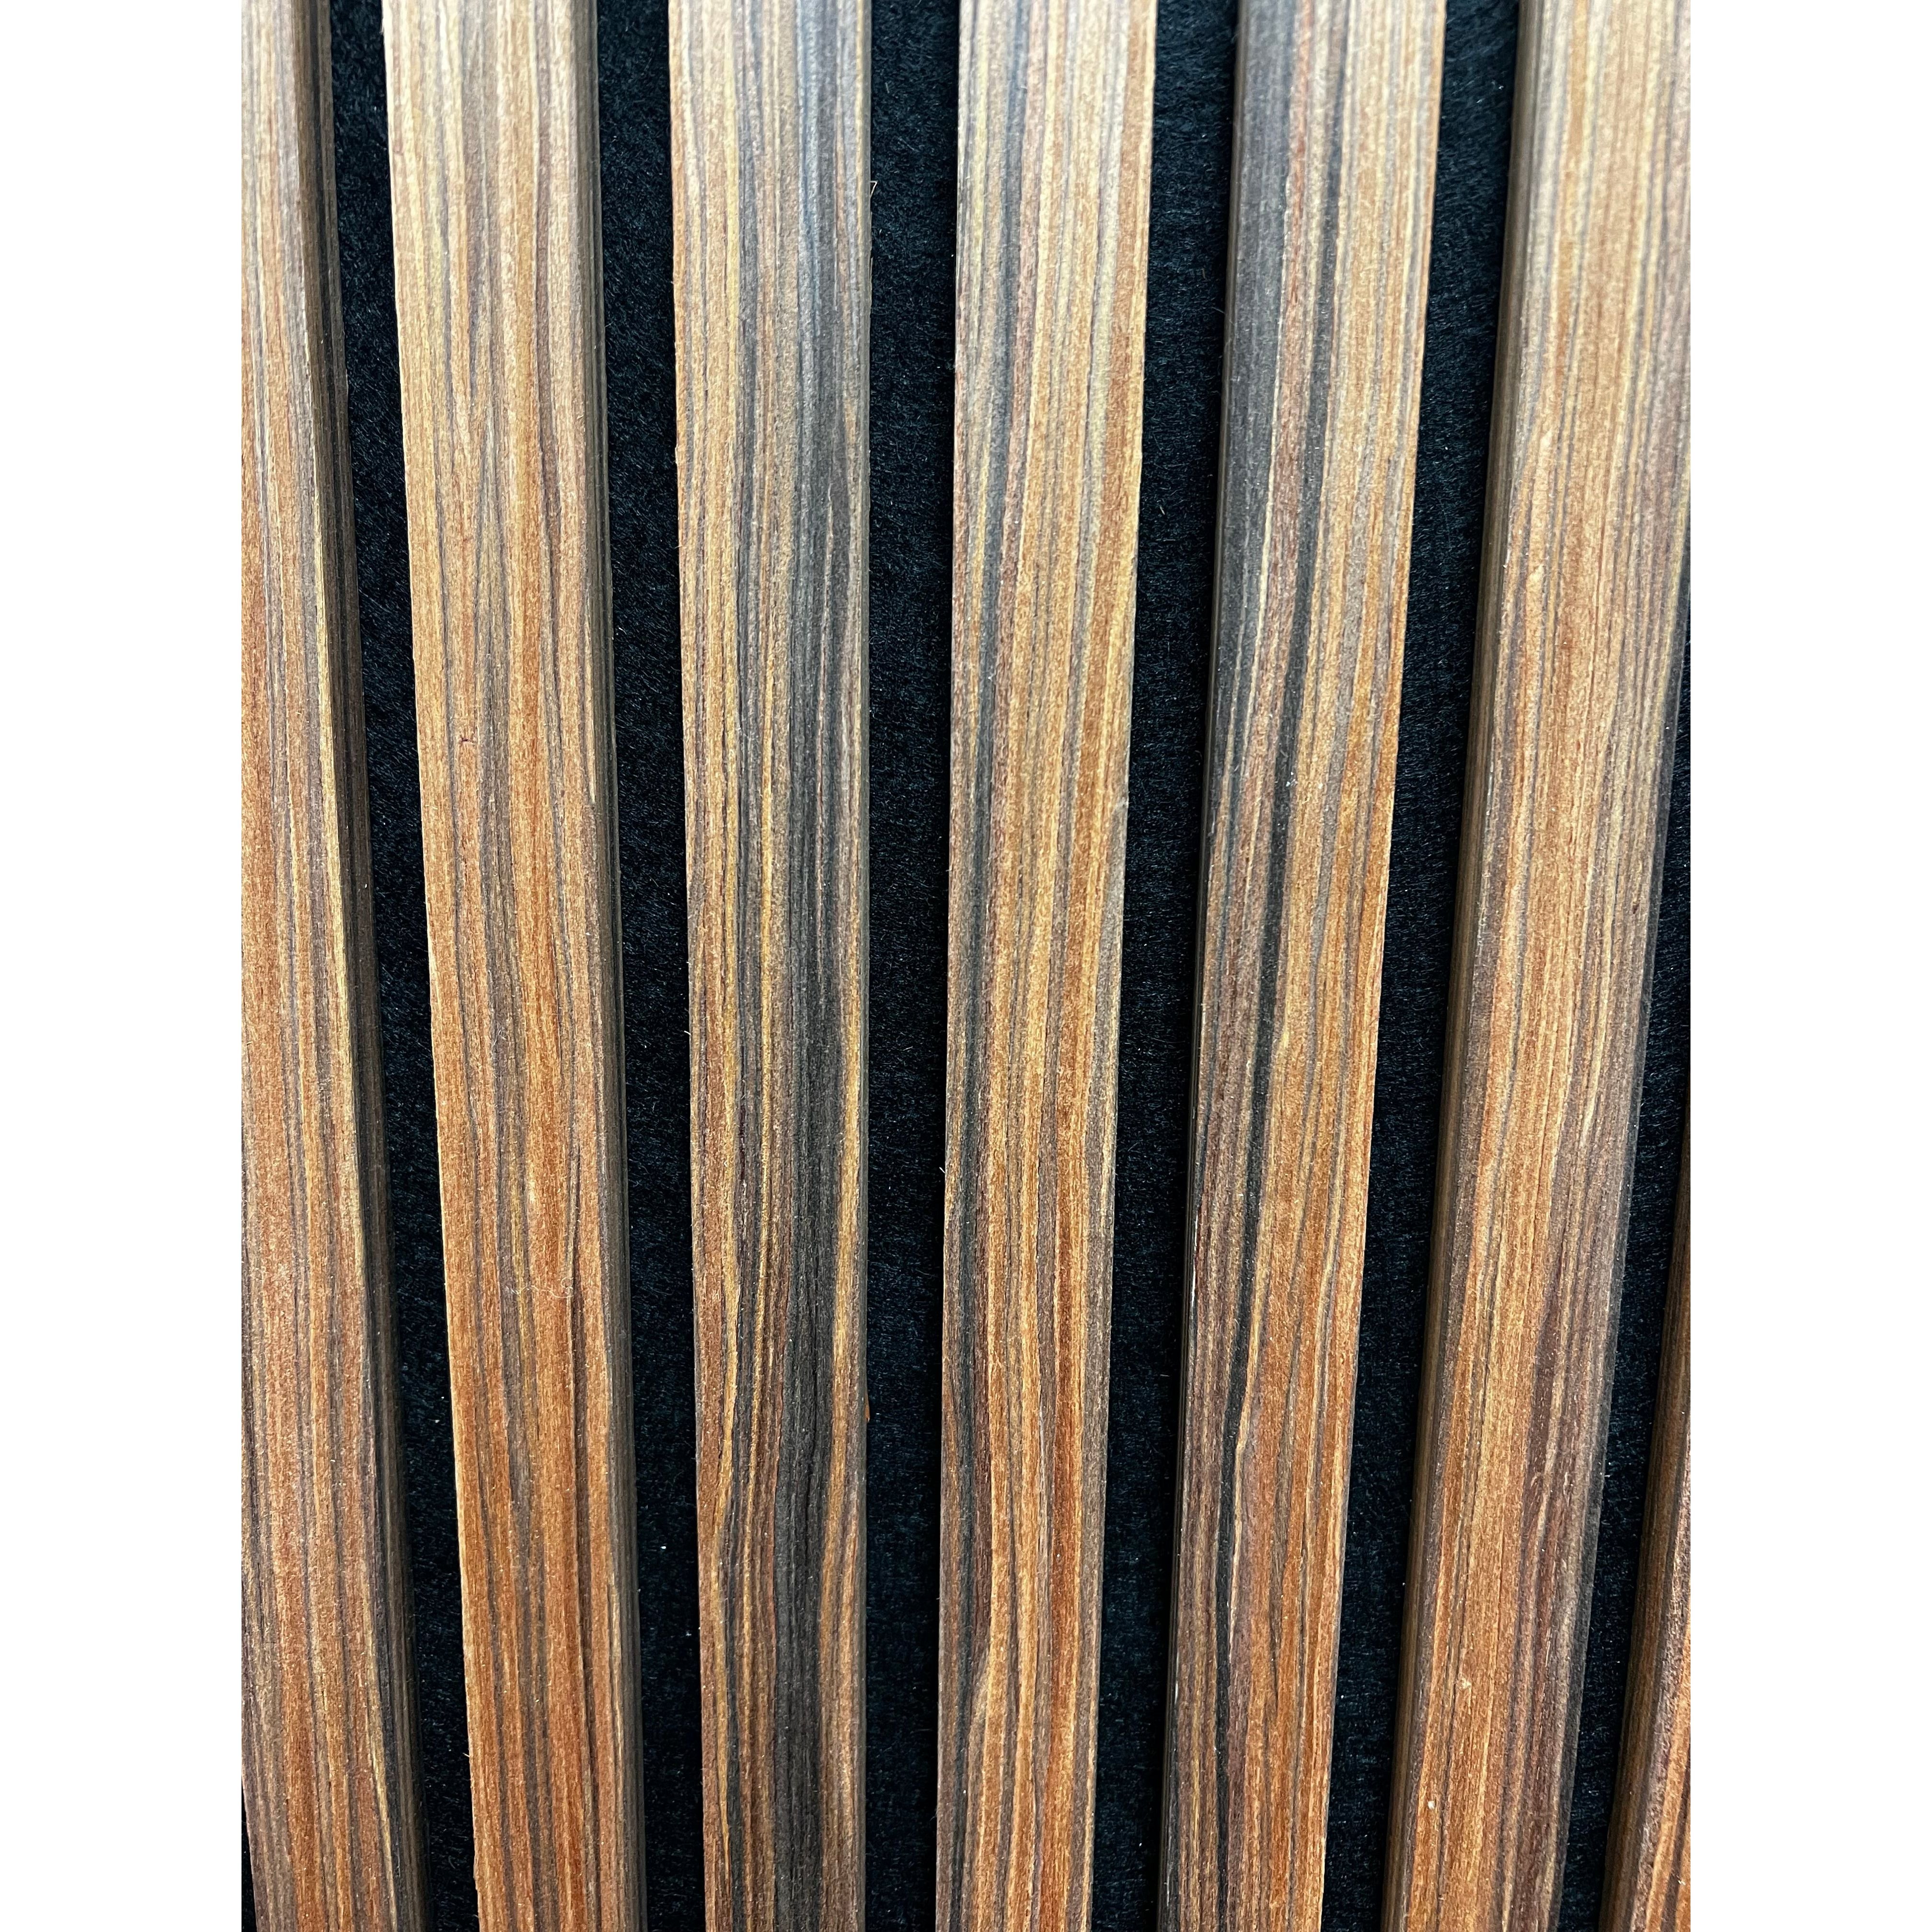 Acoustic wall panel Rosewood